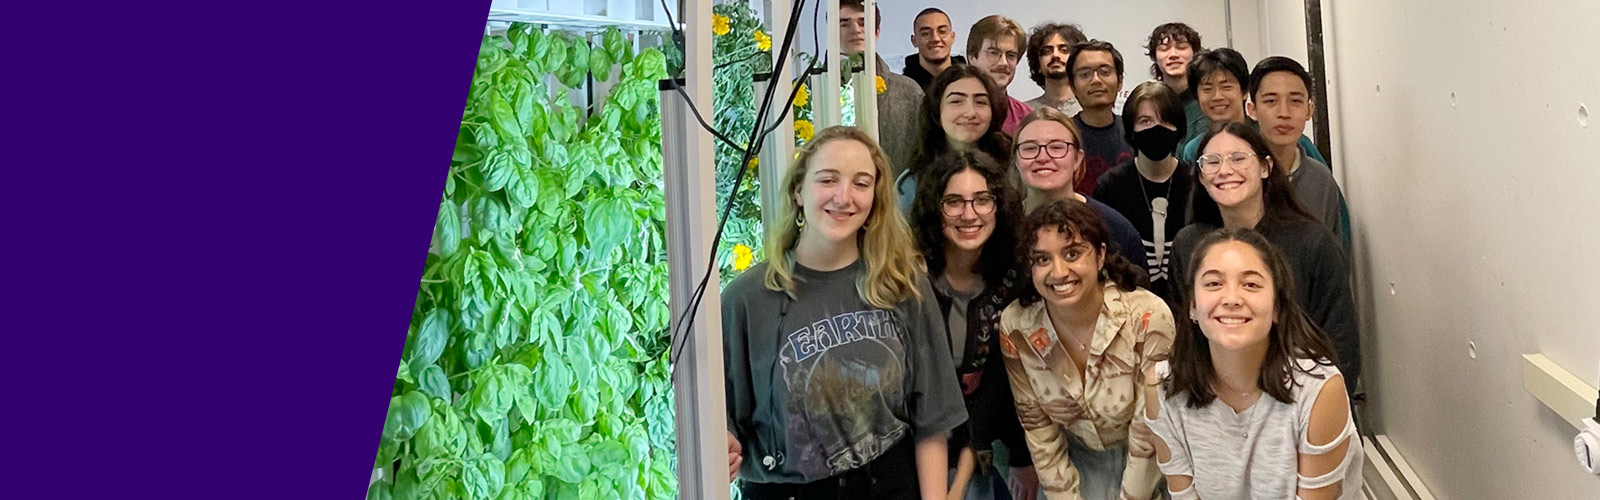 Students pose for a group photo in the Project IF hydroponics farm at University of Washingtong